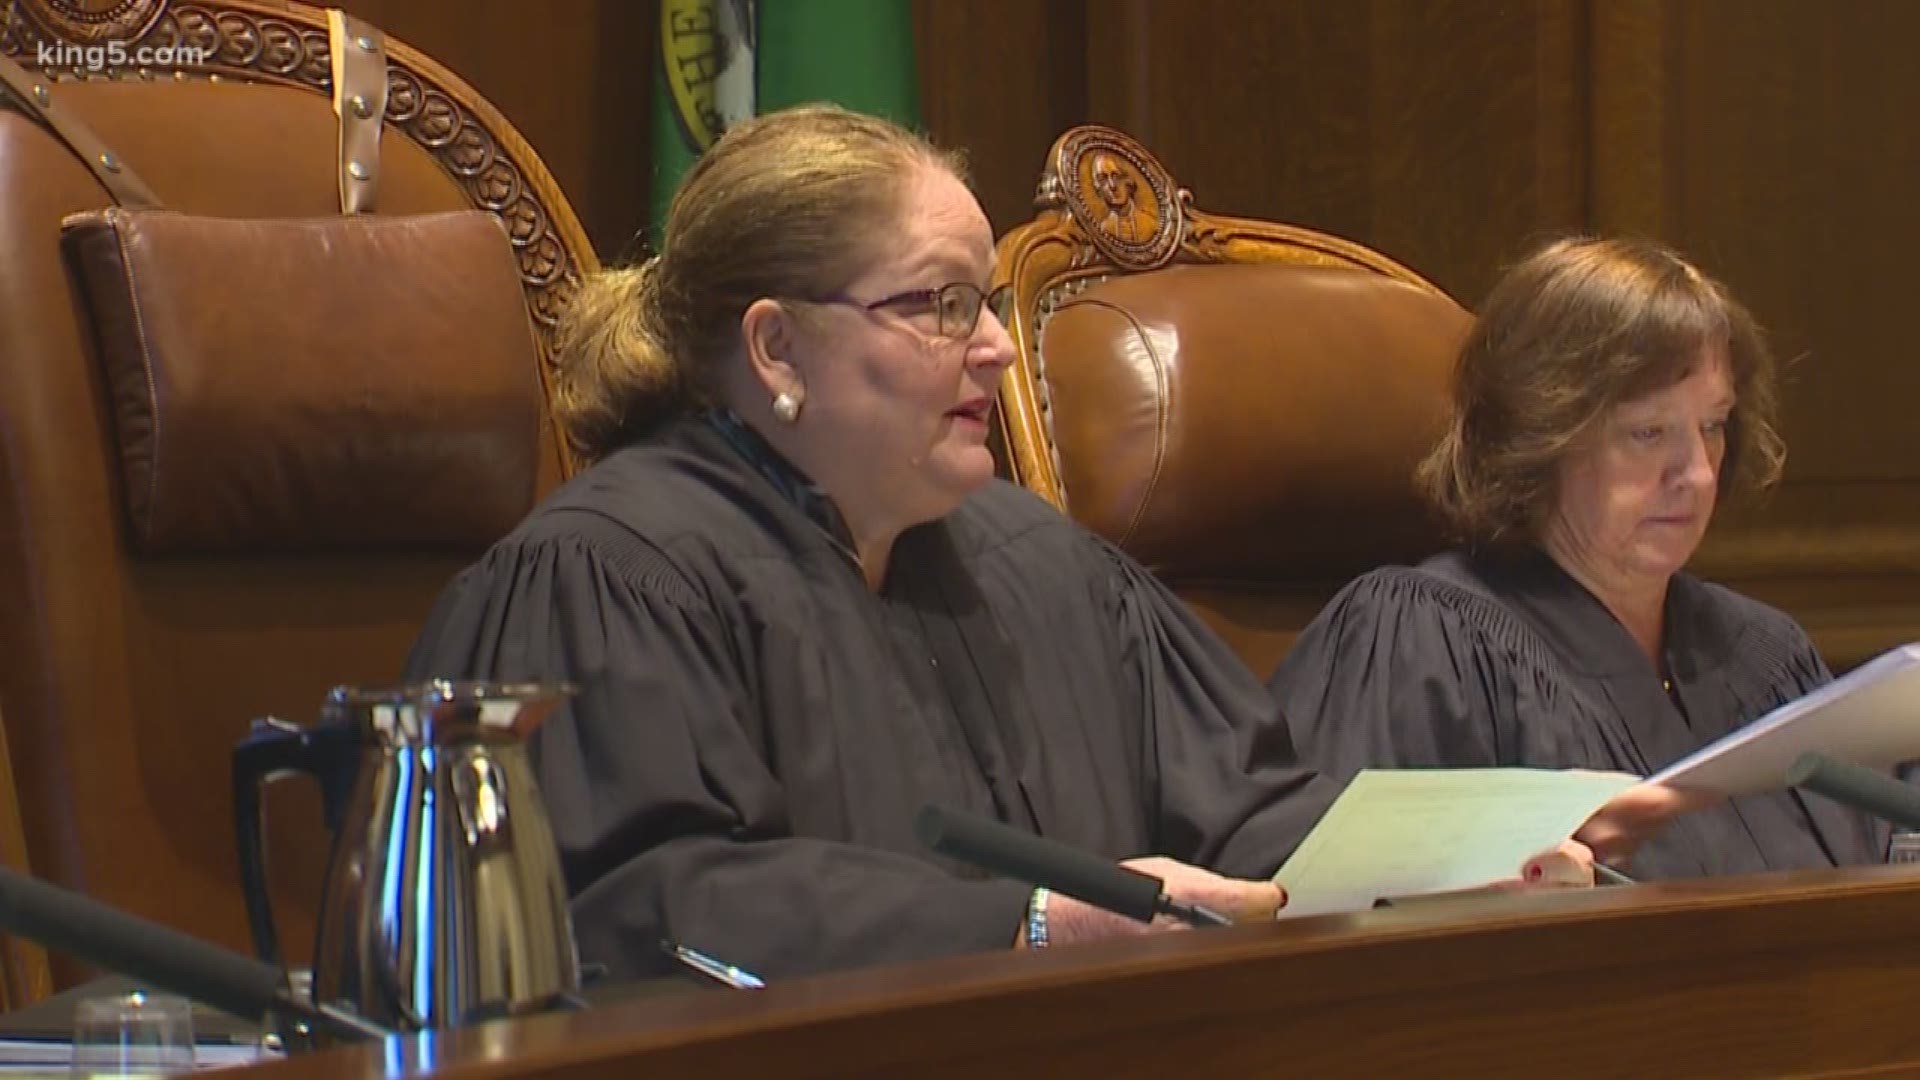 The state's top judge is facing cancer, again. Doctors have diagnosed Supreme Court Chief Justice Mary Fairhurst with state four colon cancer, for the third time. And she says she'll beat it again, because she believes in miracles.